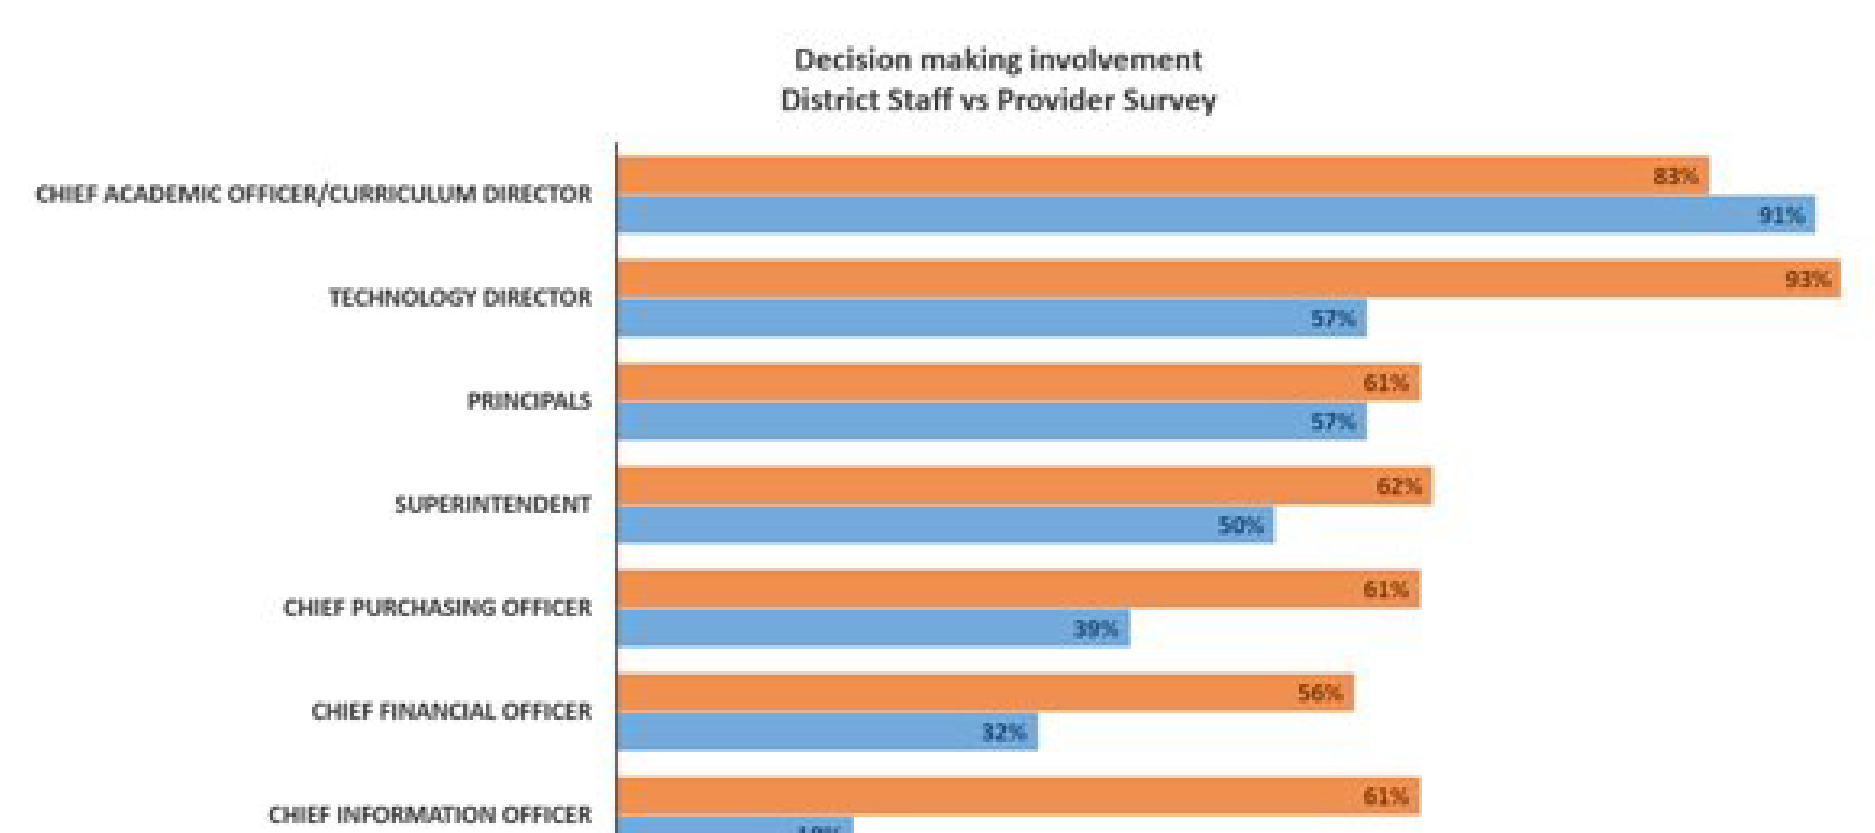 Featured Image - Top decision making officials in school districts – Surveyed vendors and district staff